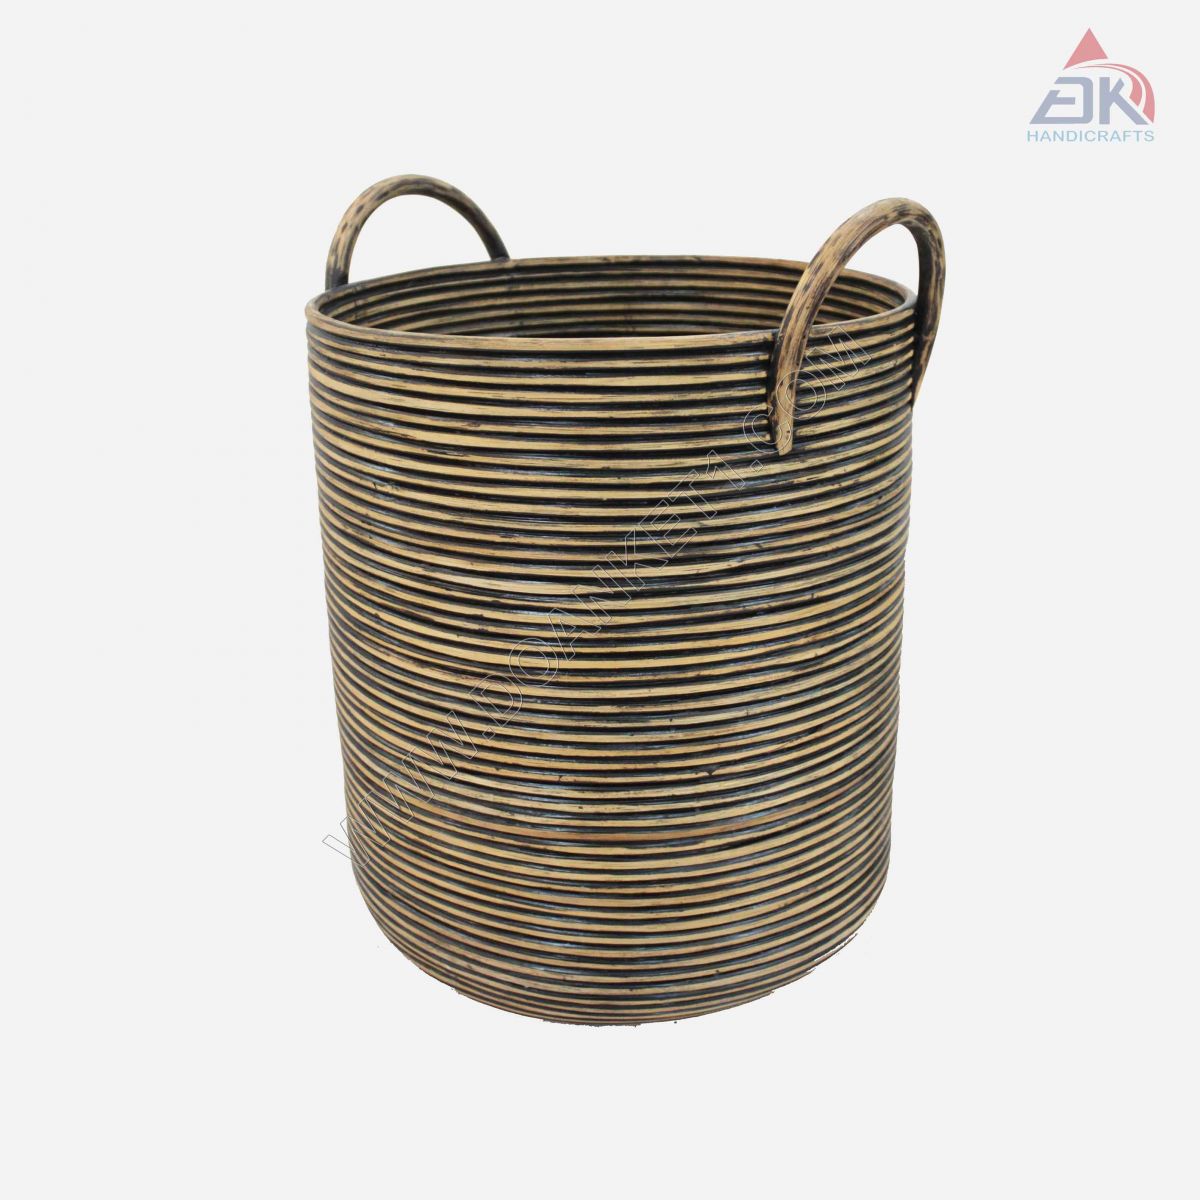 Tall Coiled Basket # DK45